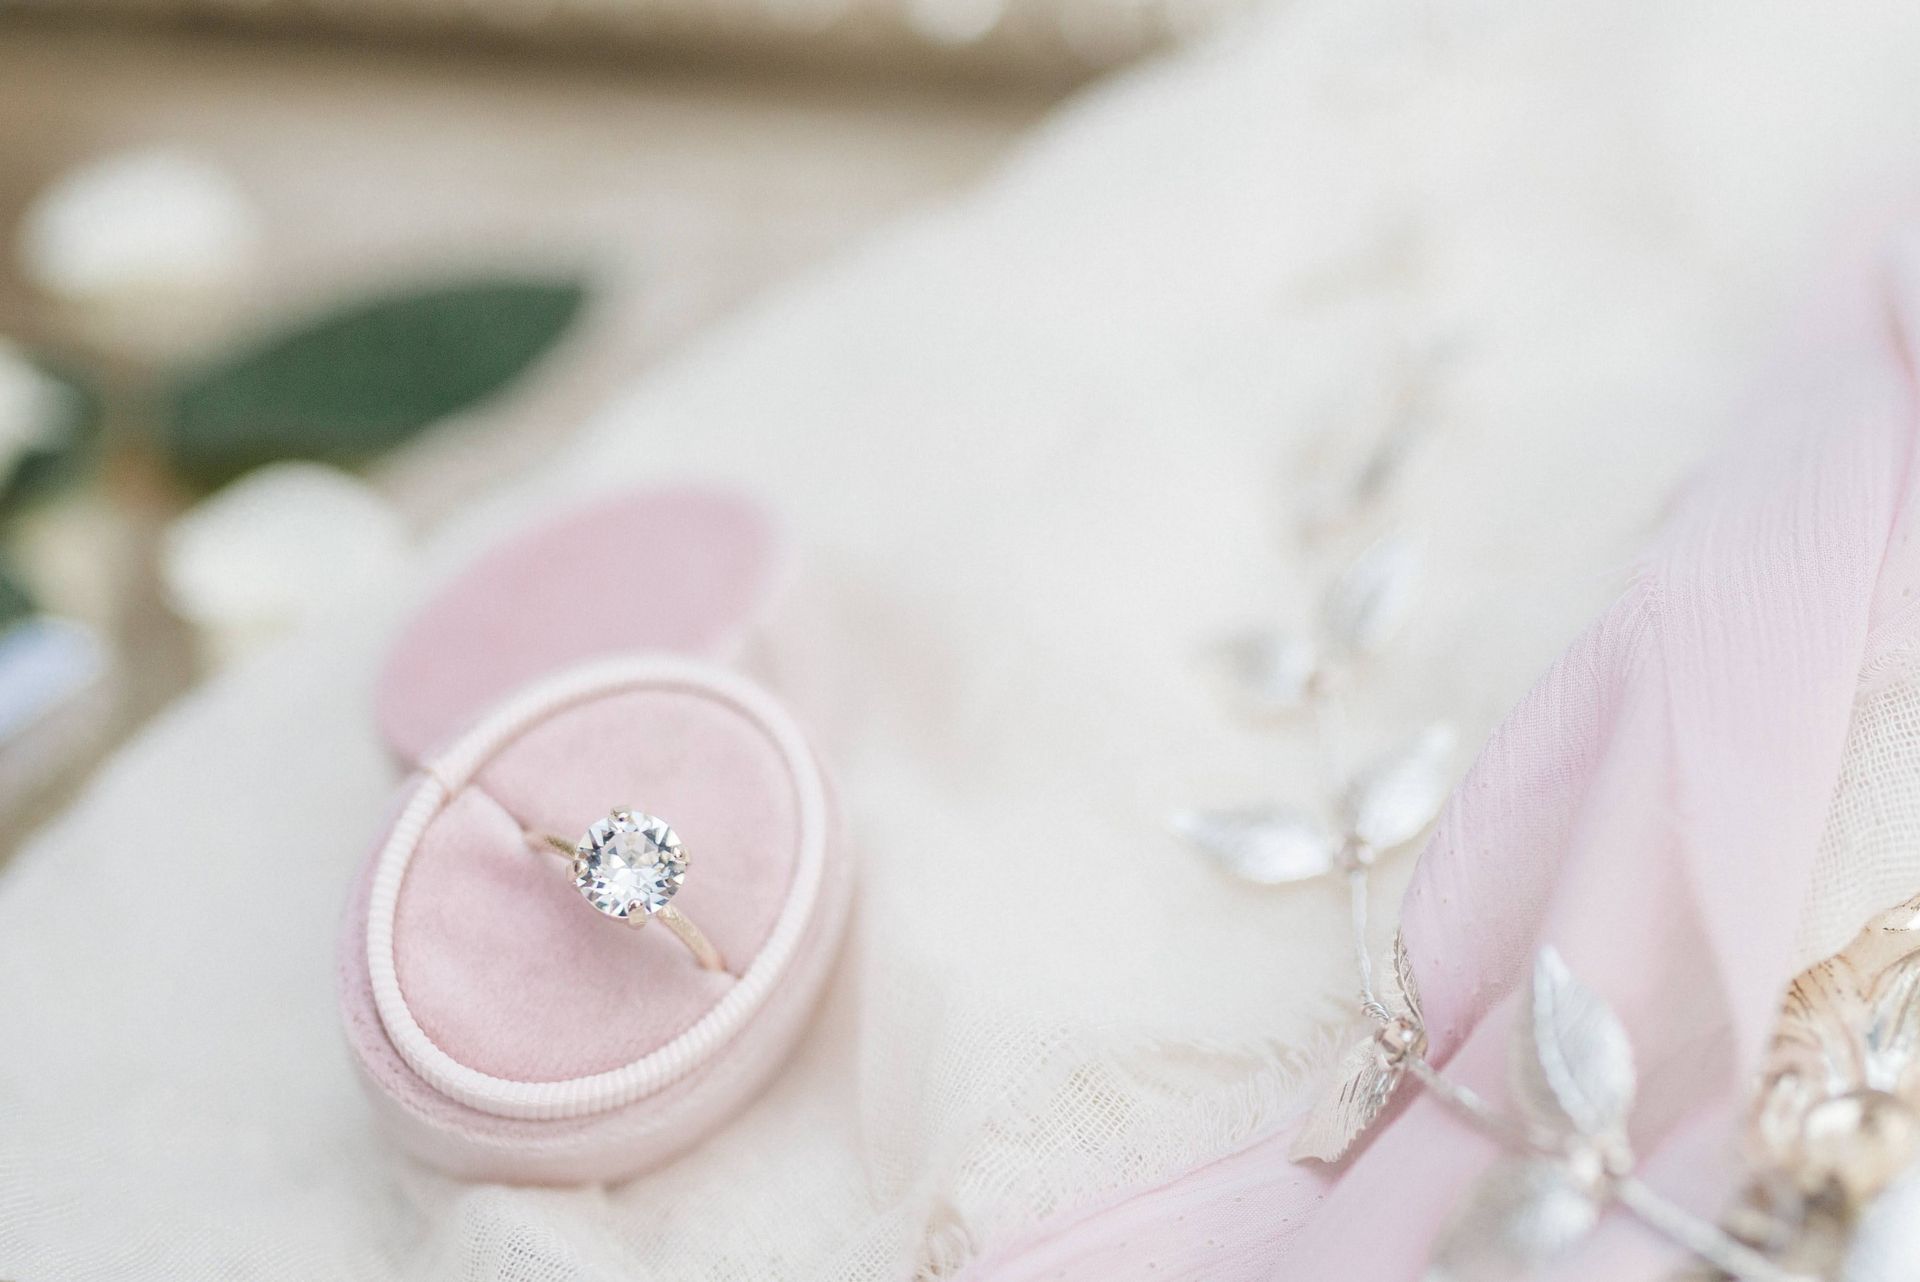 A diamond ring in a pink oval ring box displayed next to cream fabric